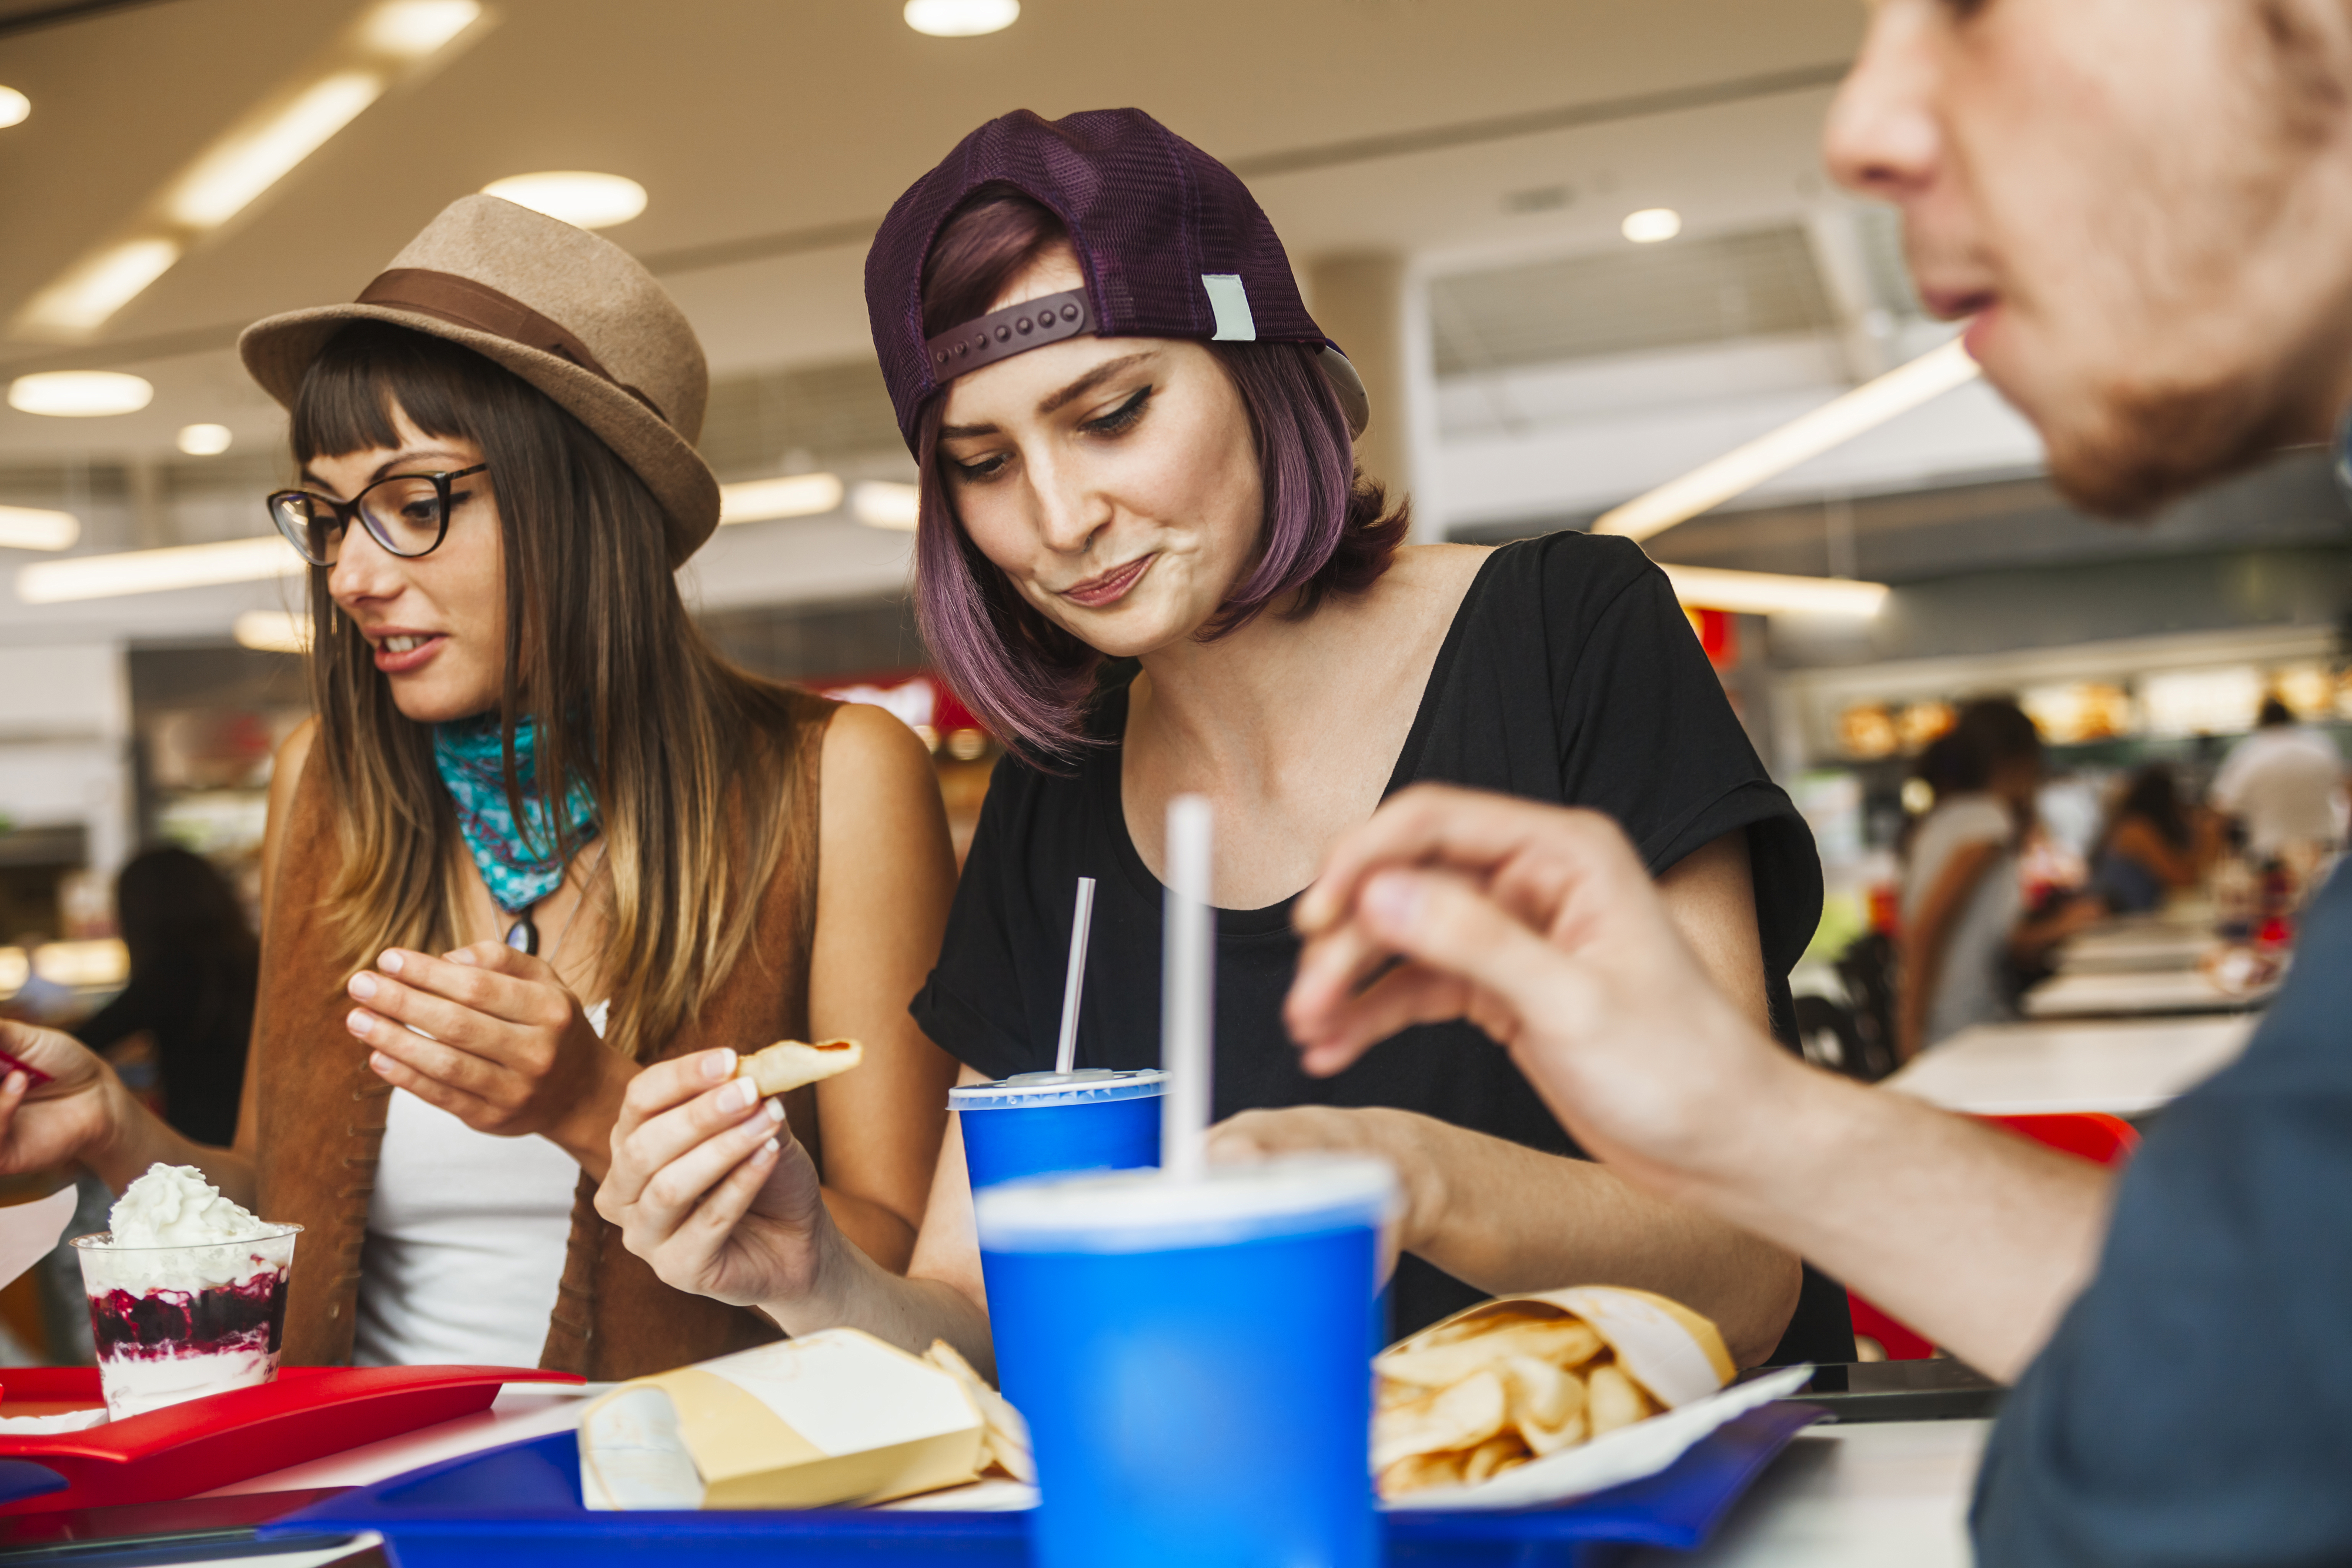 Three people enjoy a meal at a fast-food restaurant in a mall. One person wears glasses and a hat, another wears a backward cap. They are eating fries and drinking soft drinks.